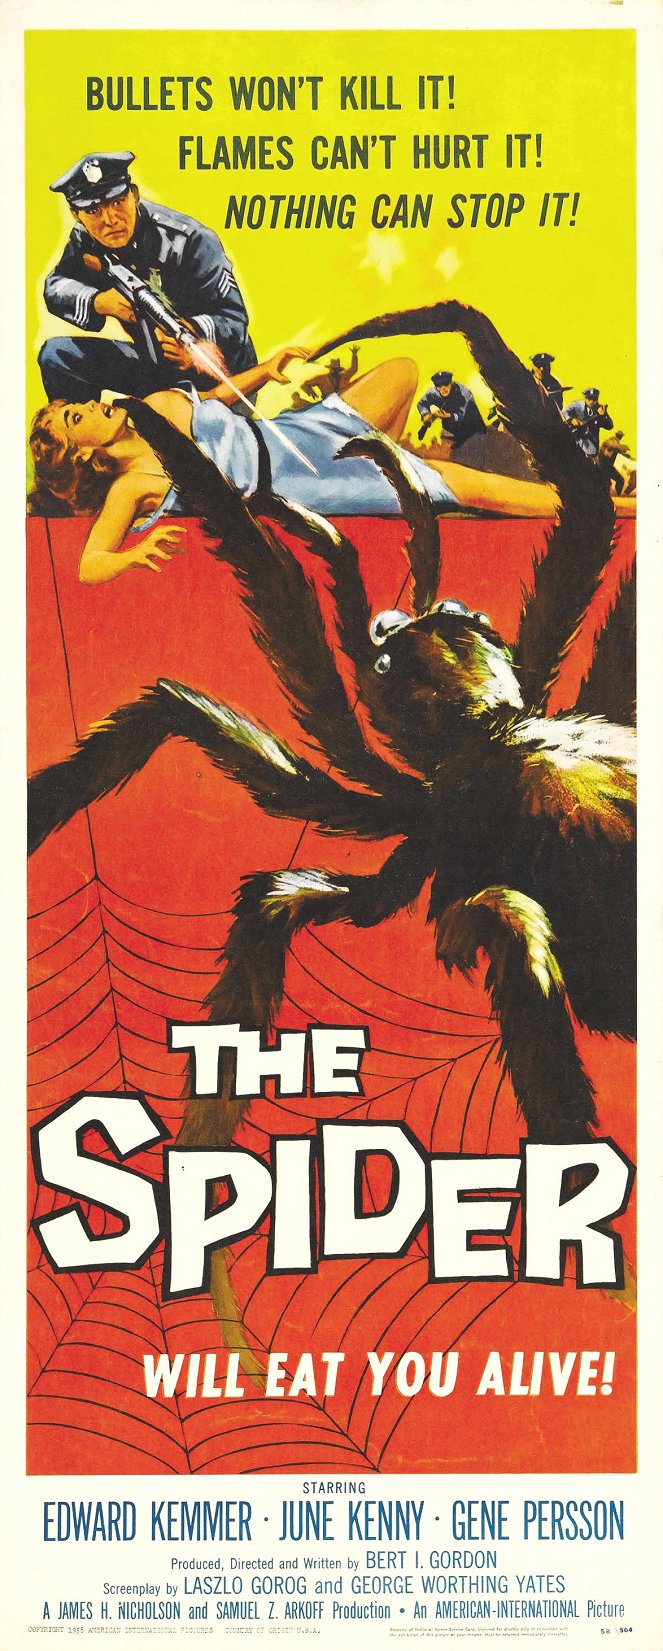 The Spider - Posters